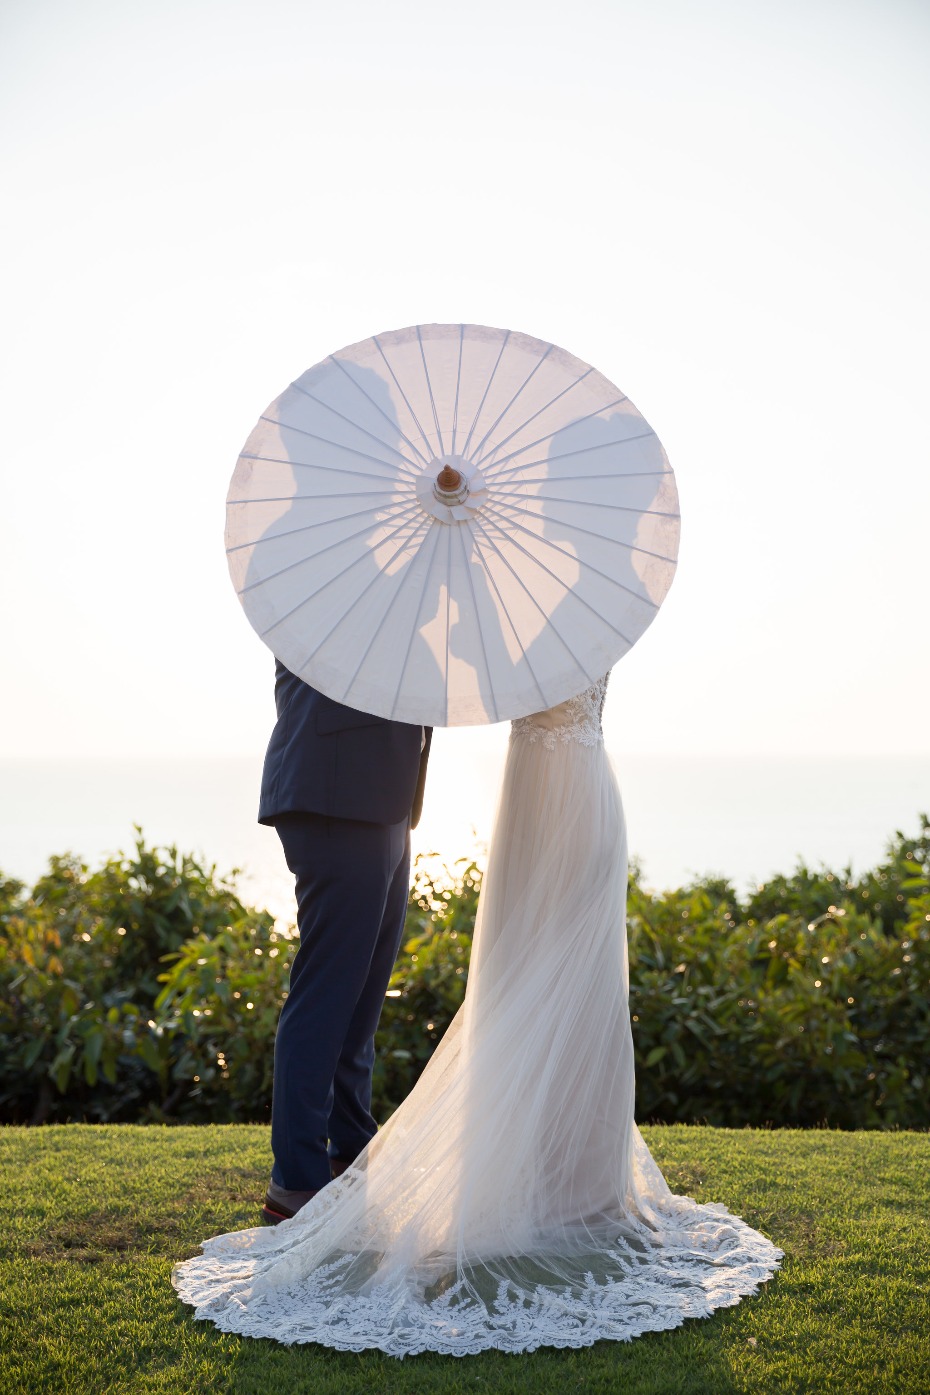 Cute parasol portrait for the bride and groom